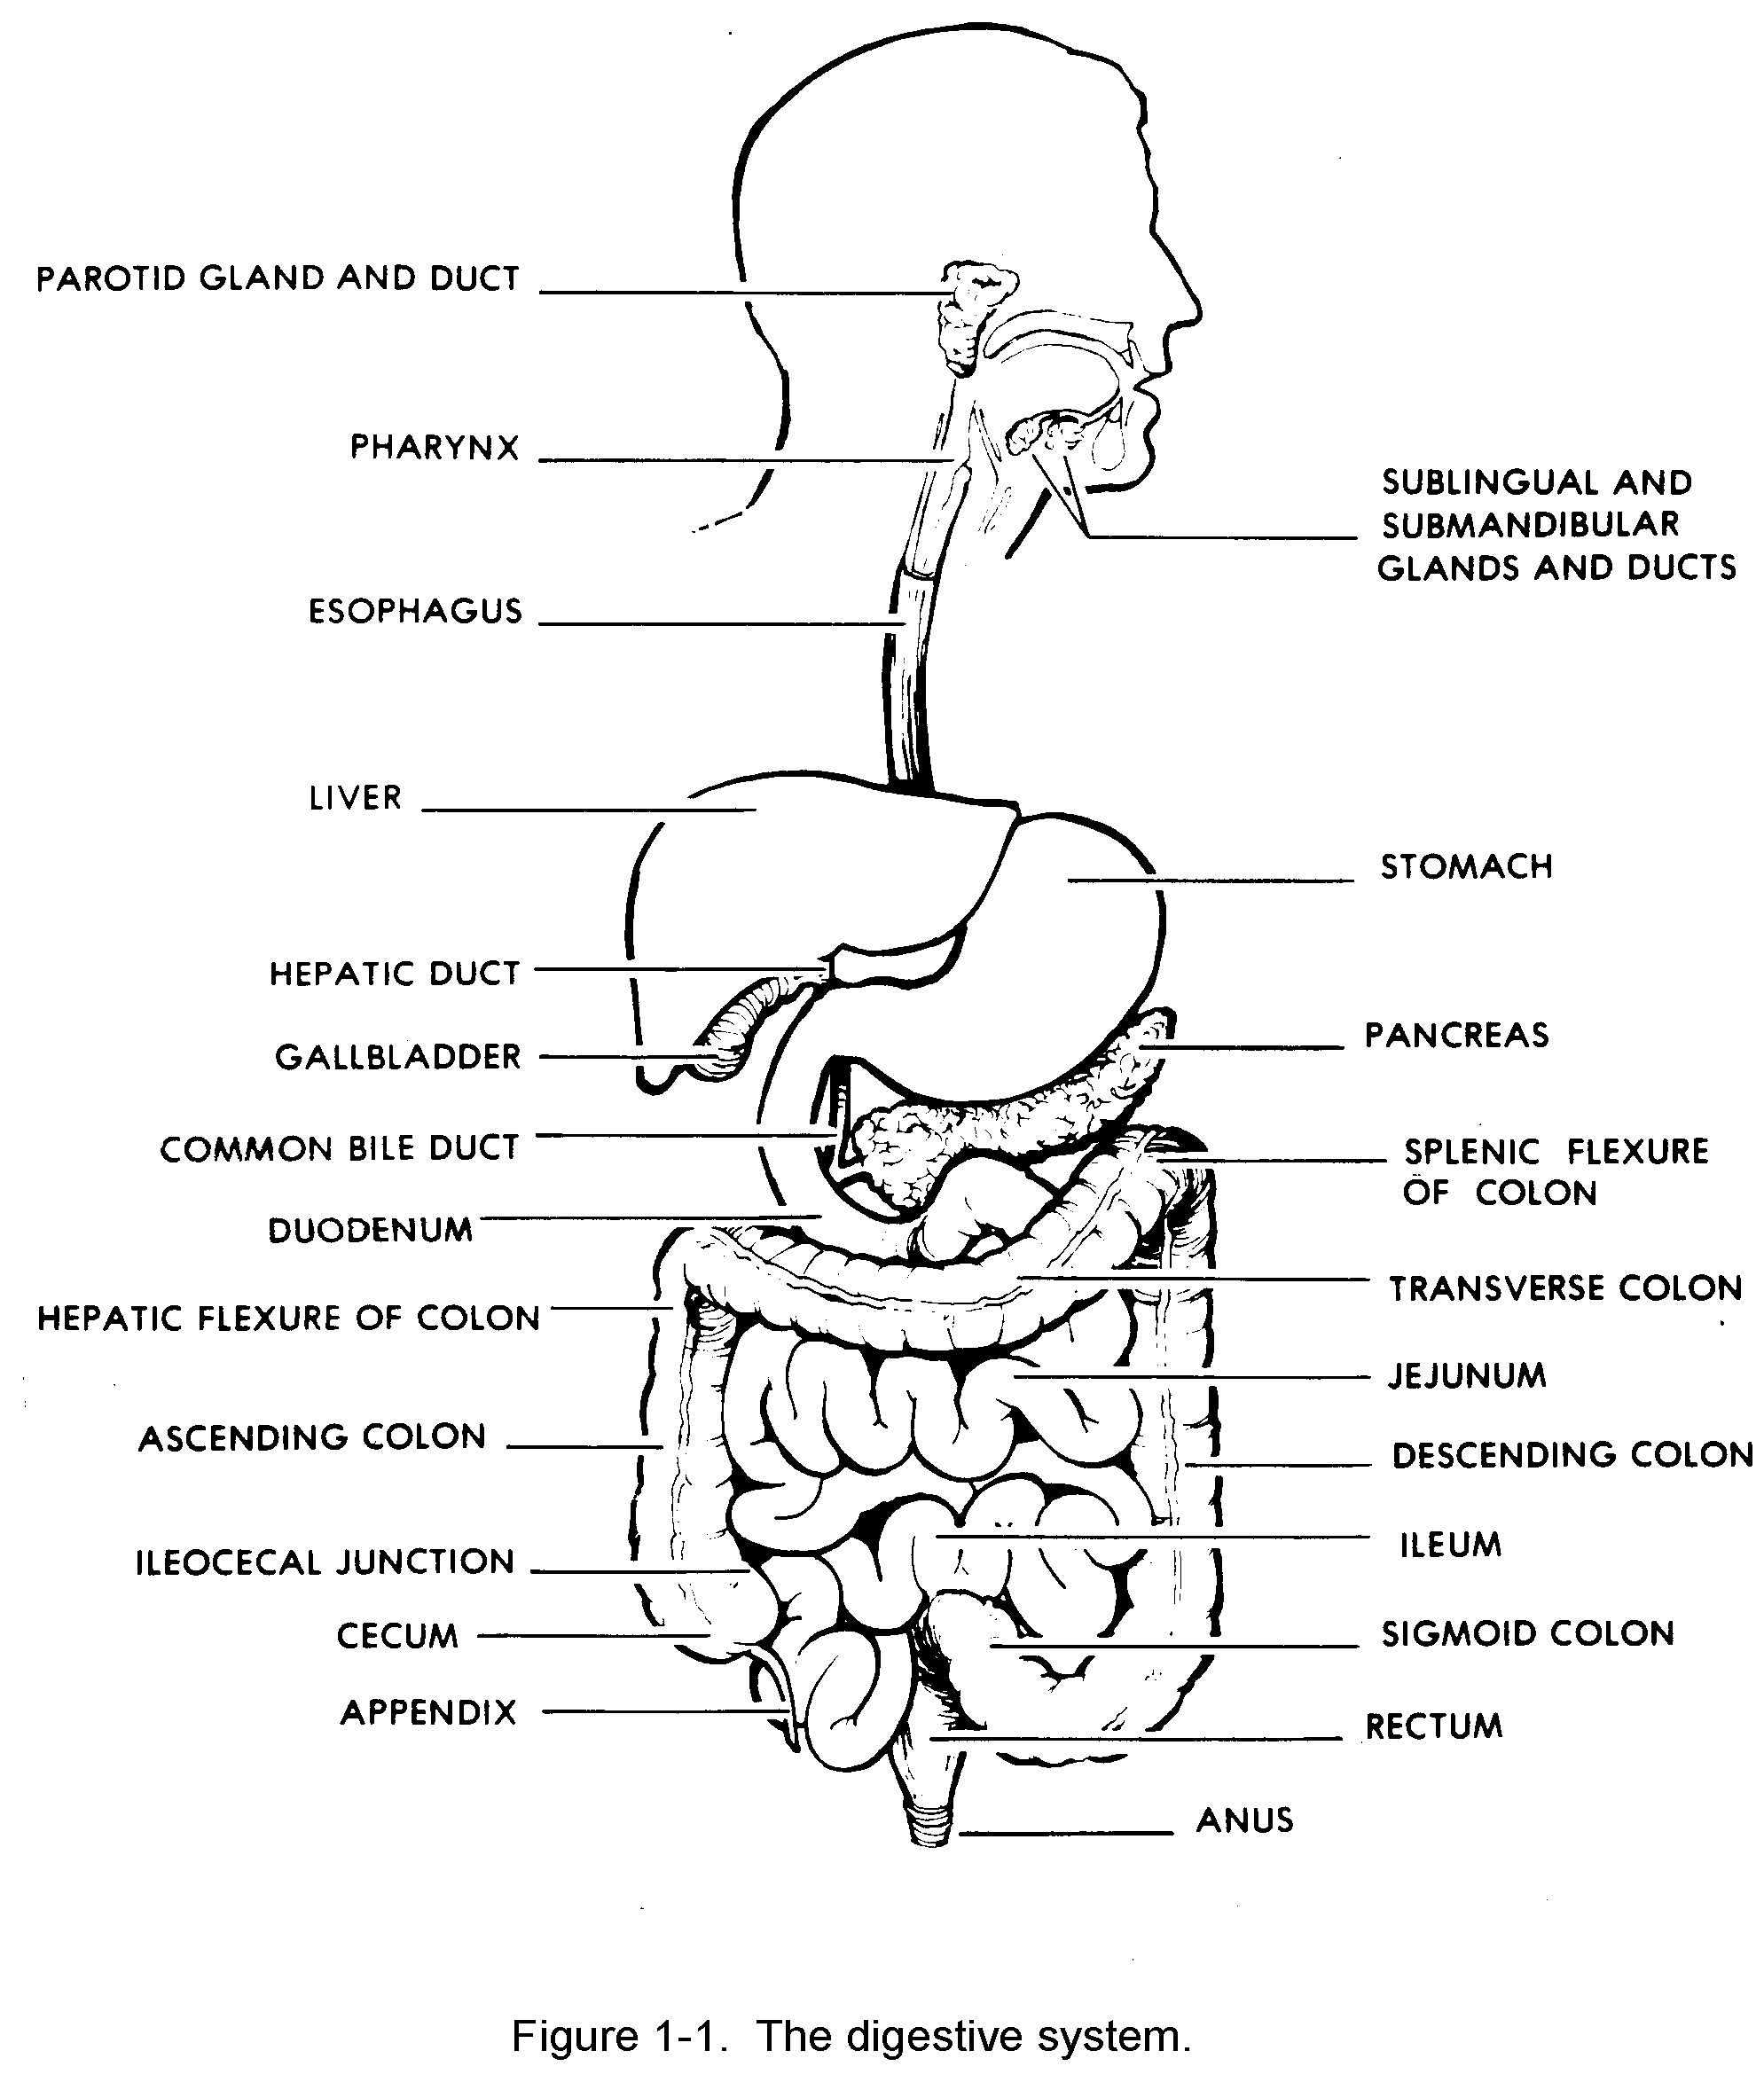 The Human Digestive Tract Worksheet Answers or Schön the Anatomy the Human Digestive System Ideen Anatomie Von